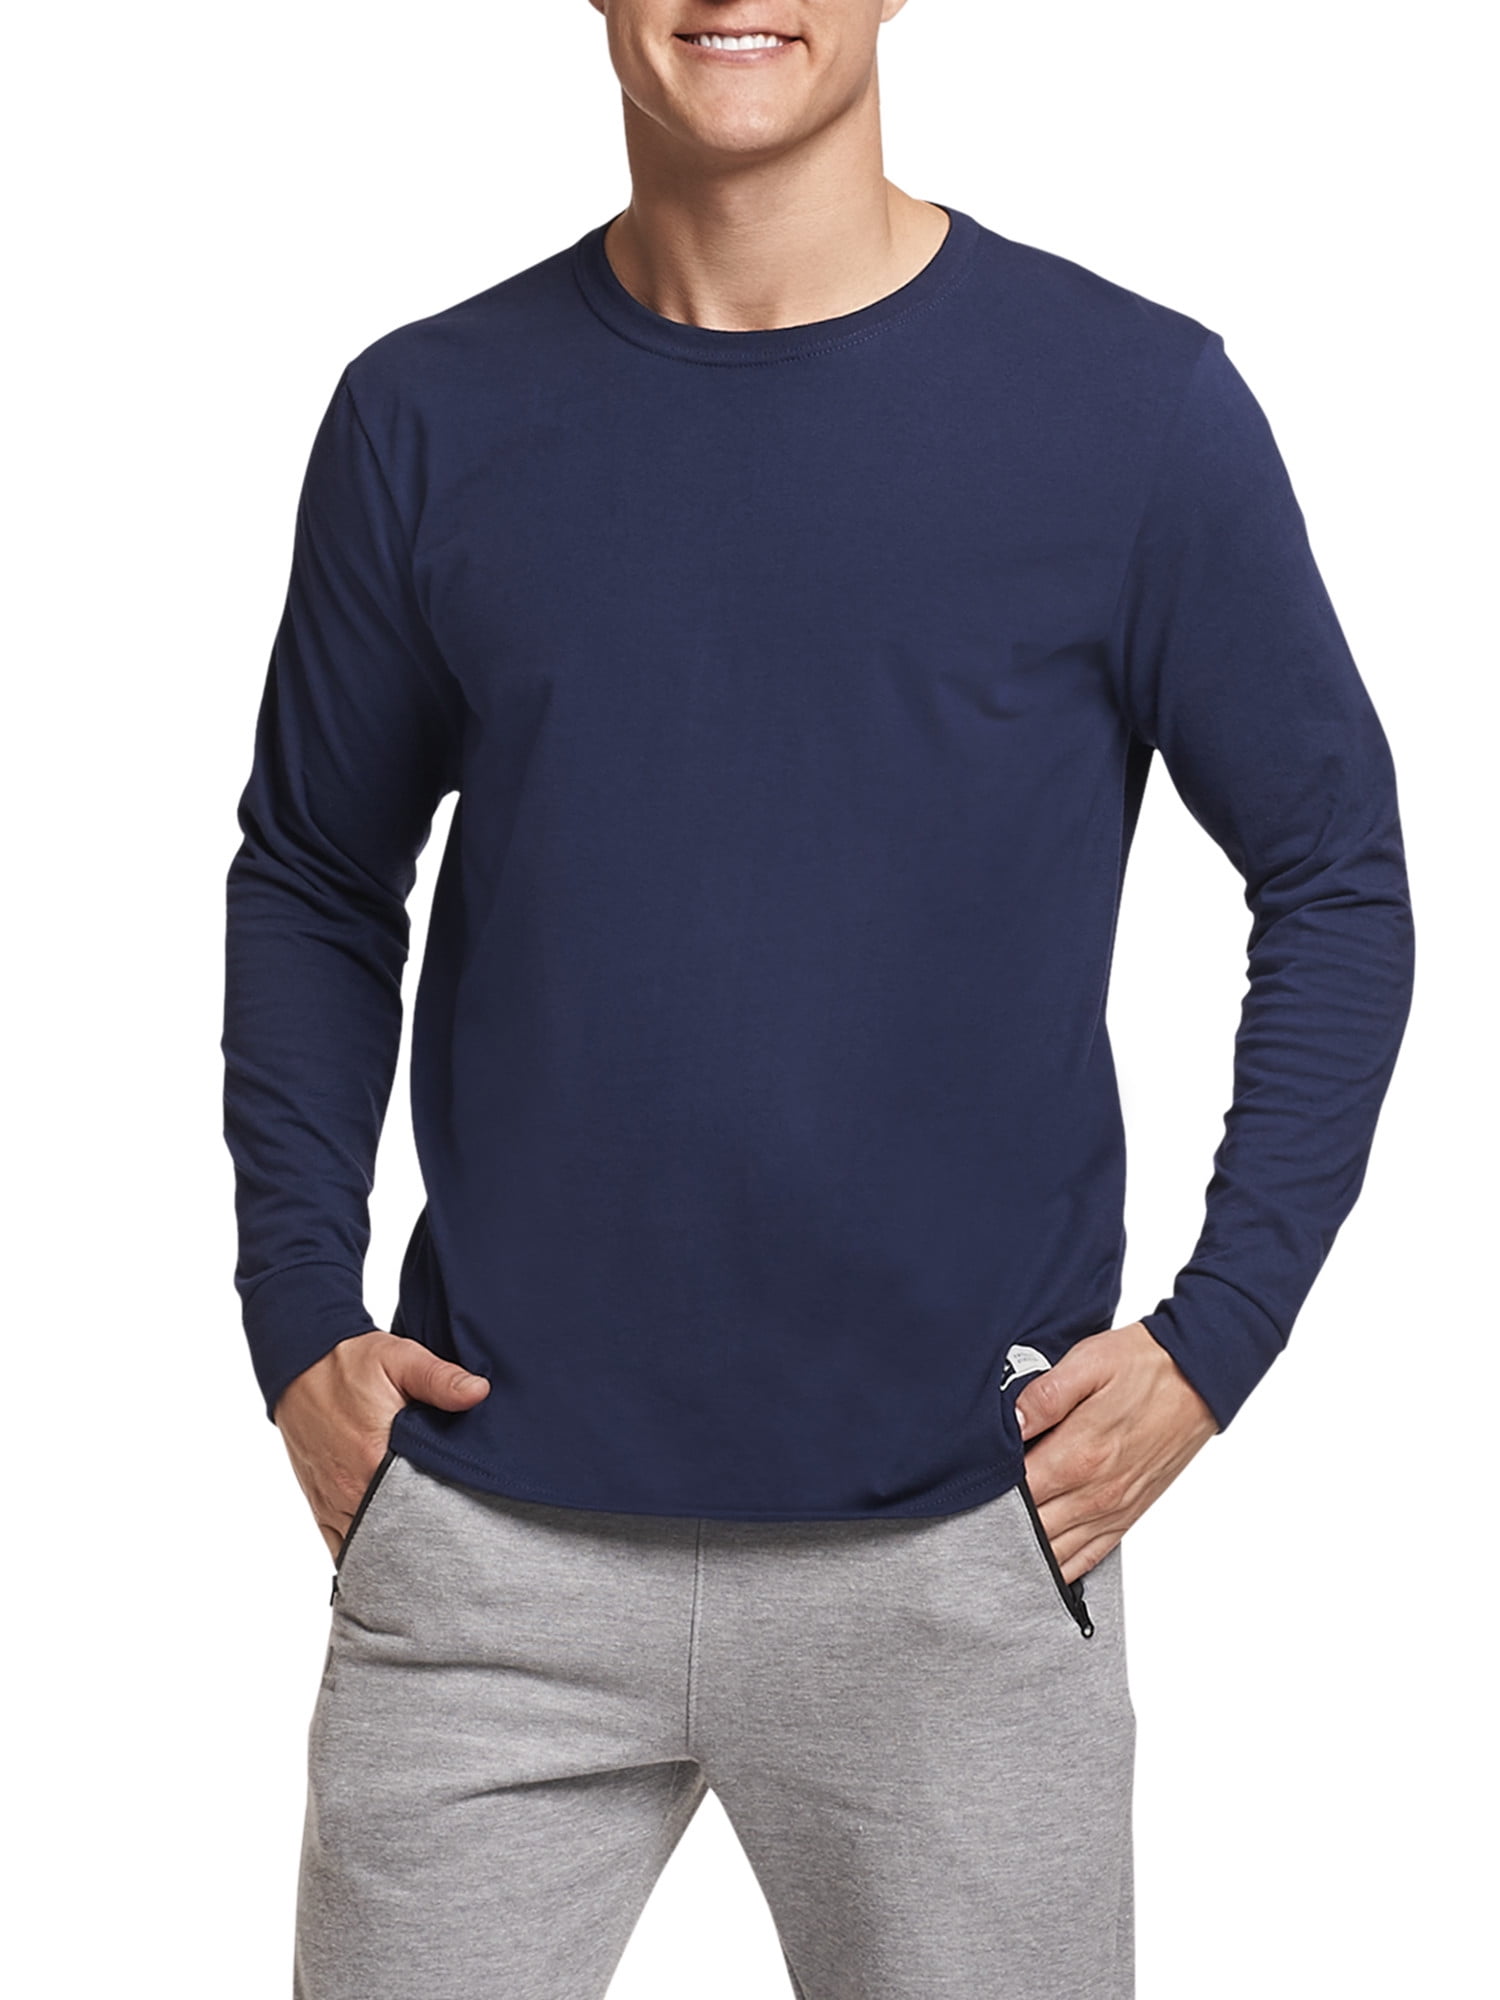 Russell Athletic Men's Long Sleeve Performance T-Shirt 